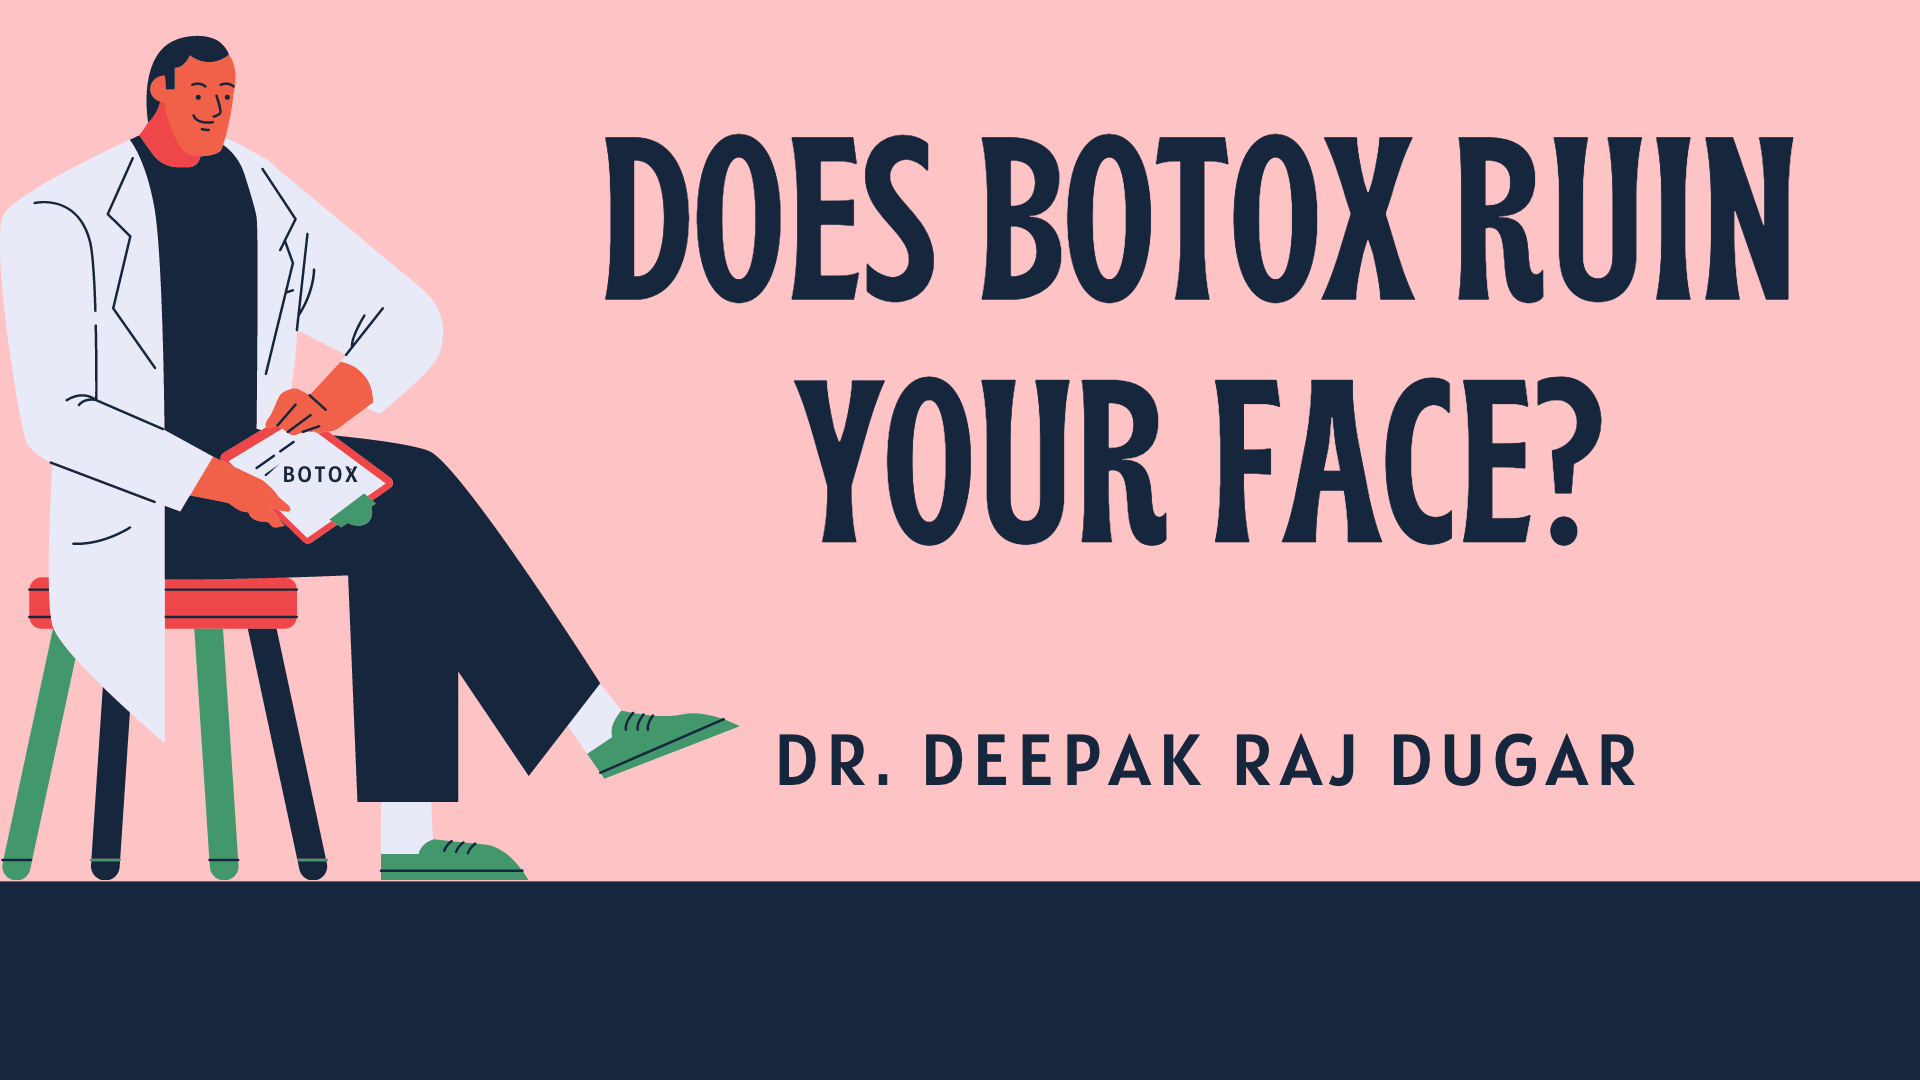 illustration of plastic surgeon reading labs beside the text "Does Botox Ruin Your Face?"